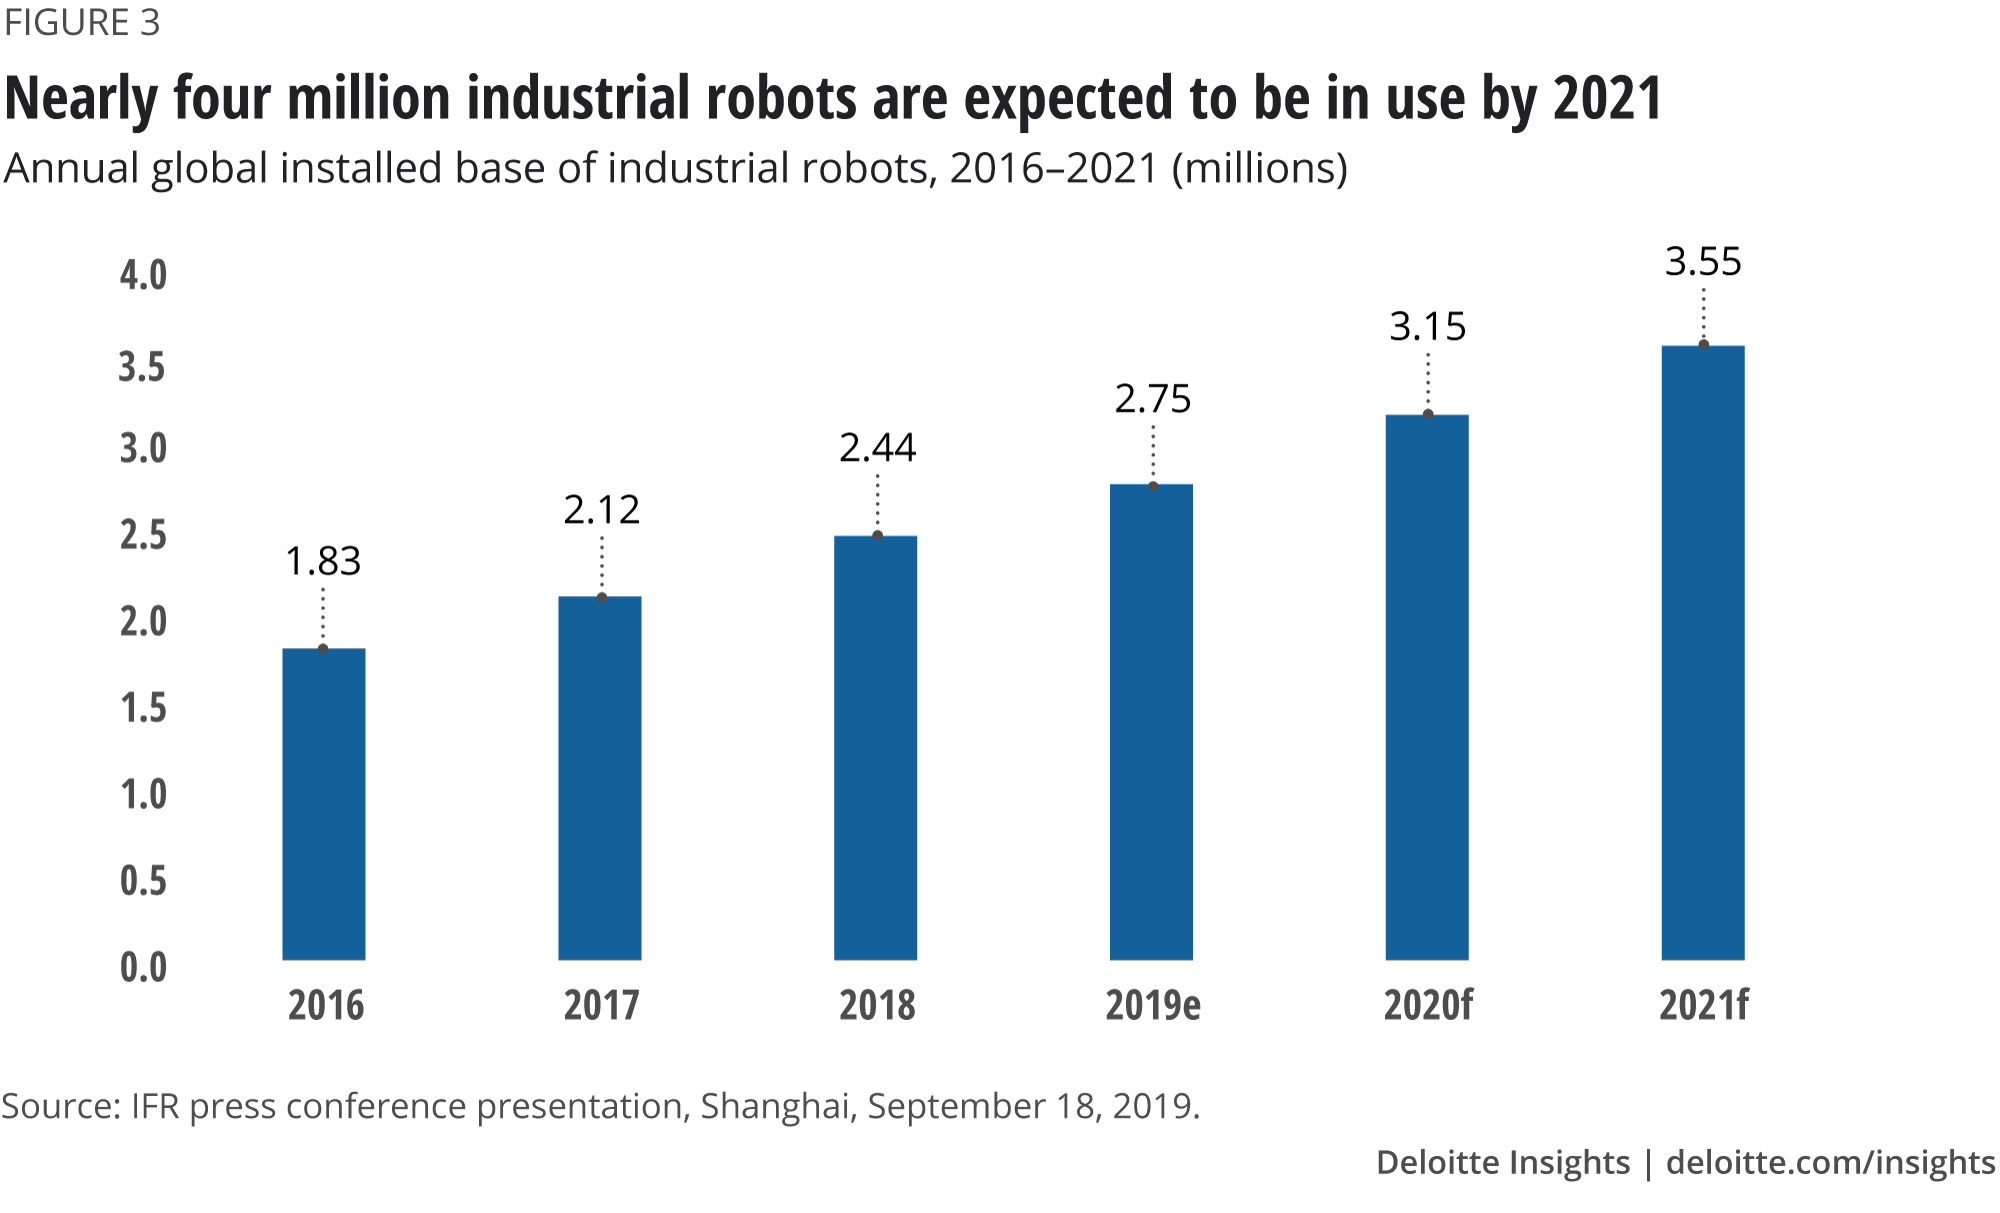 Nearly four million industrial robots are expected to be in use by 2021